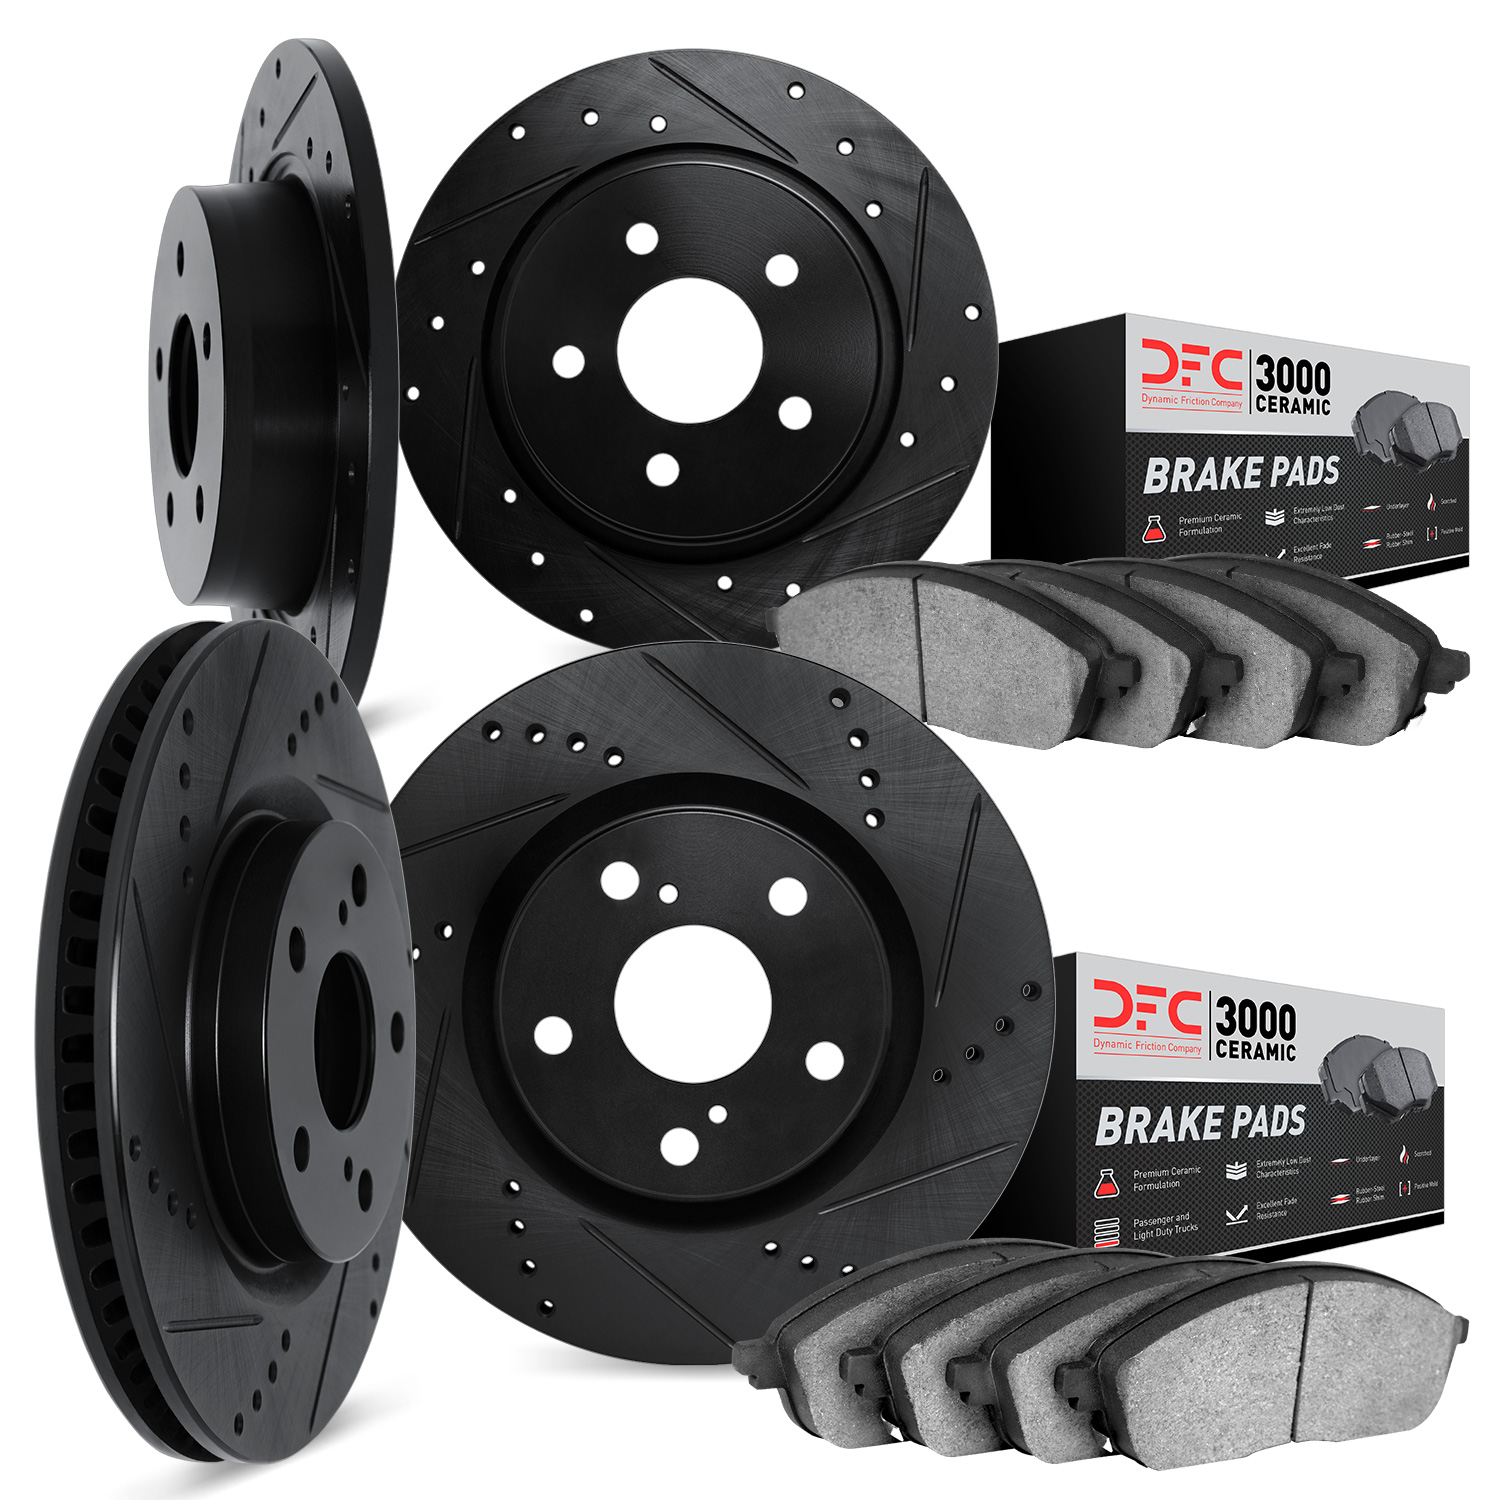 8304-58016 Drilled/Slotted Brake Rotors with 3000-Series Ceramic Brake Pads Kit [Black], 2016-2016 Acura/Honda, Position: Front